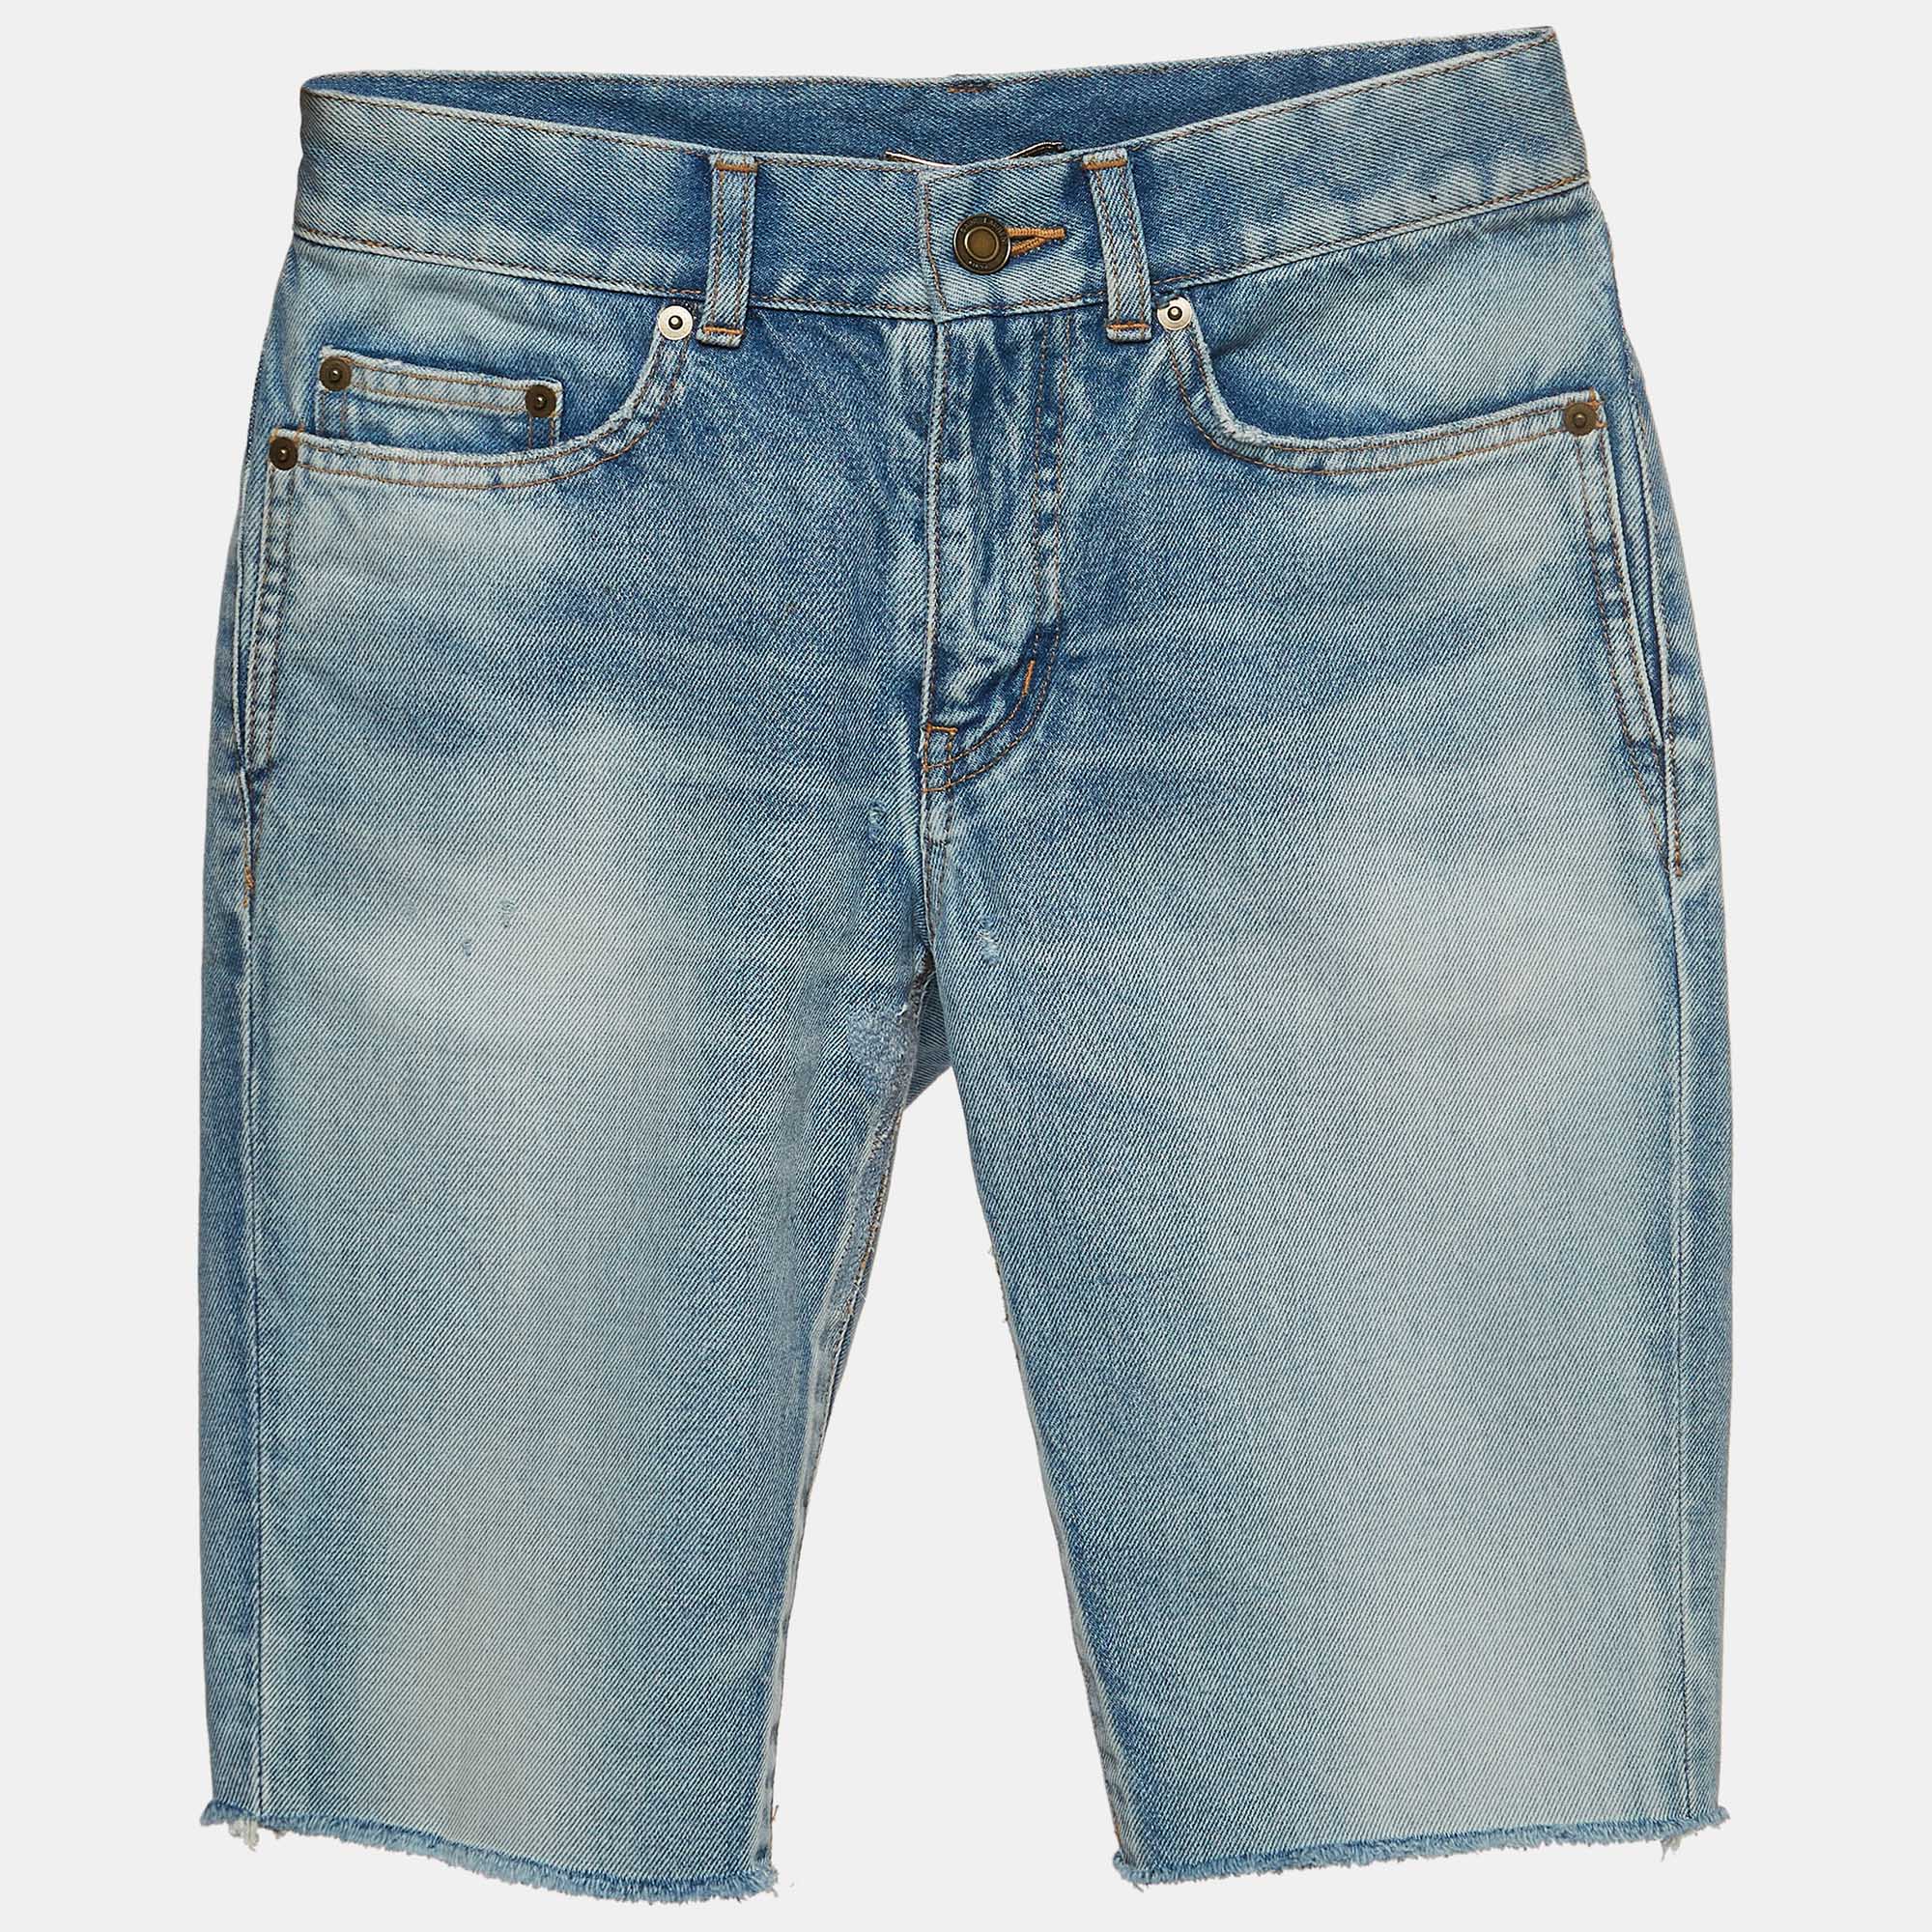 Now lounge around in comfort with these shorts from Saint Laurent. The shorts are tailored from cotton and feature a simple design. They come with belt loops on the waist a buttoned closure and multiple pockets.